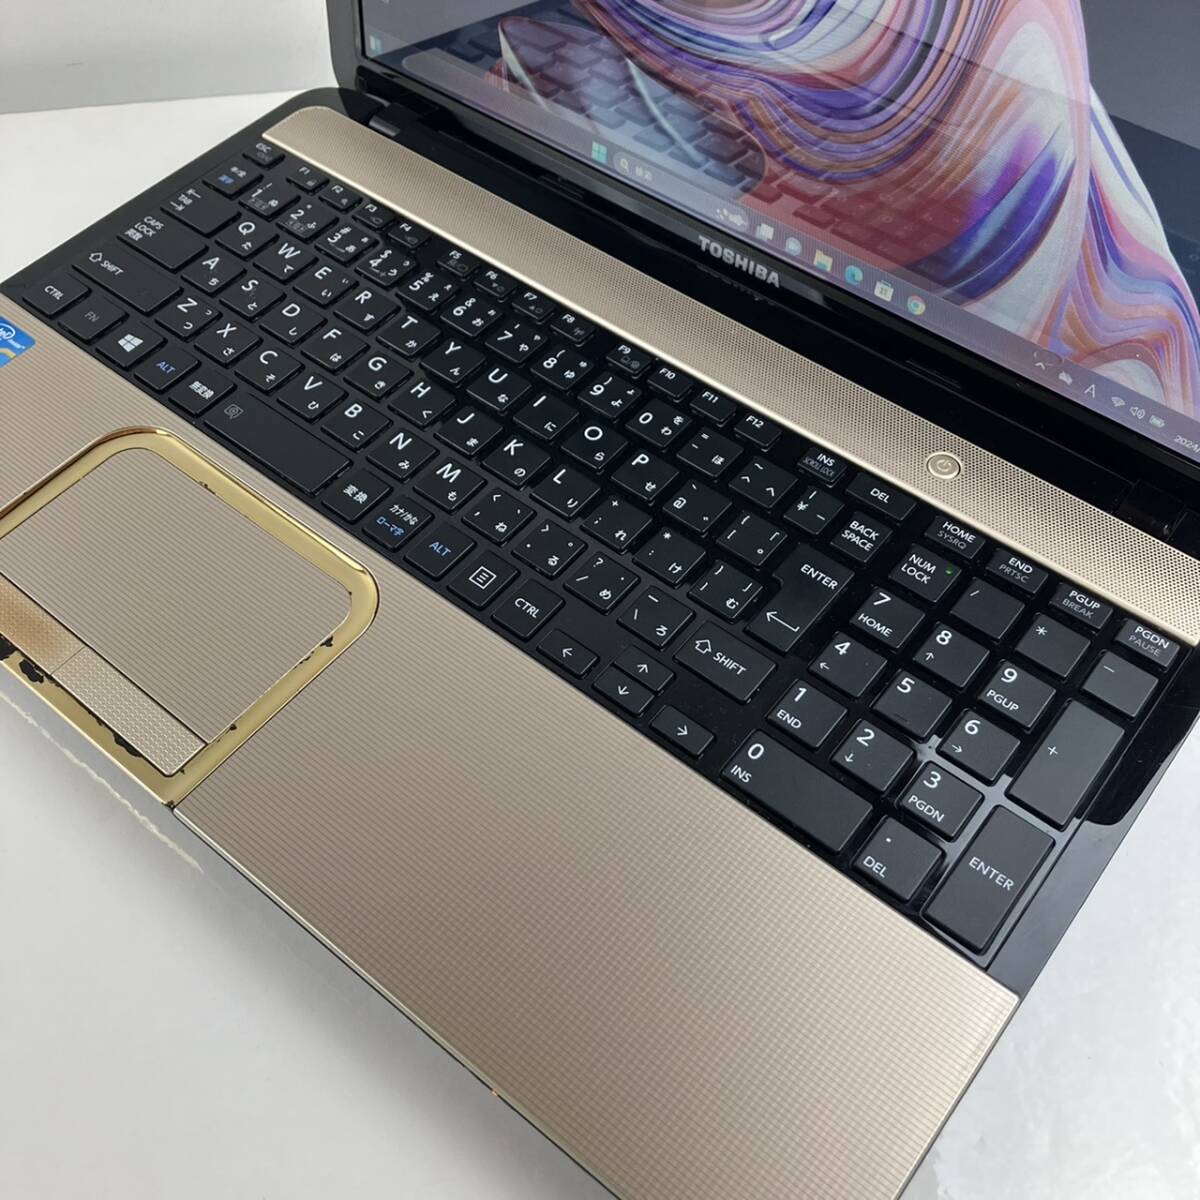 [. speed new goods SSD512GB* strongest i7* new goods memory 16GB]Core i7-3.40GHz/Windows11 laptop /Office2019/Blu-ray/Bluetooth/ battery replaced 